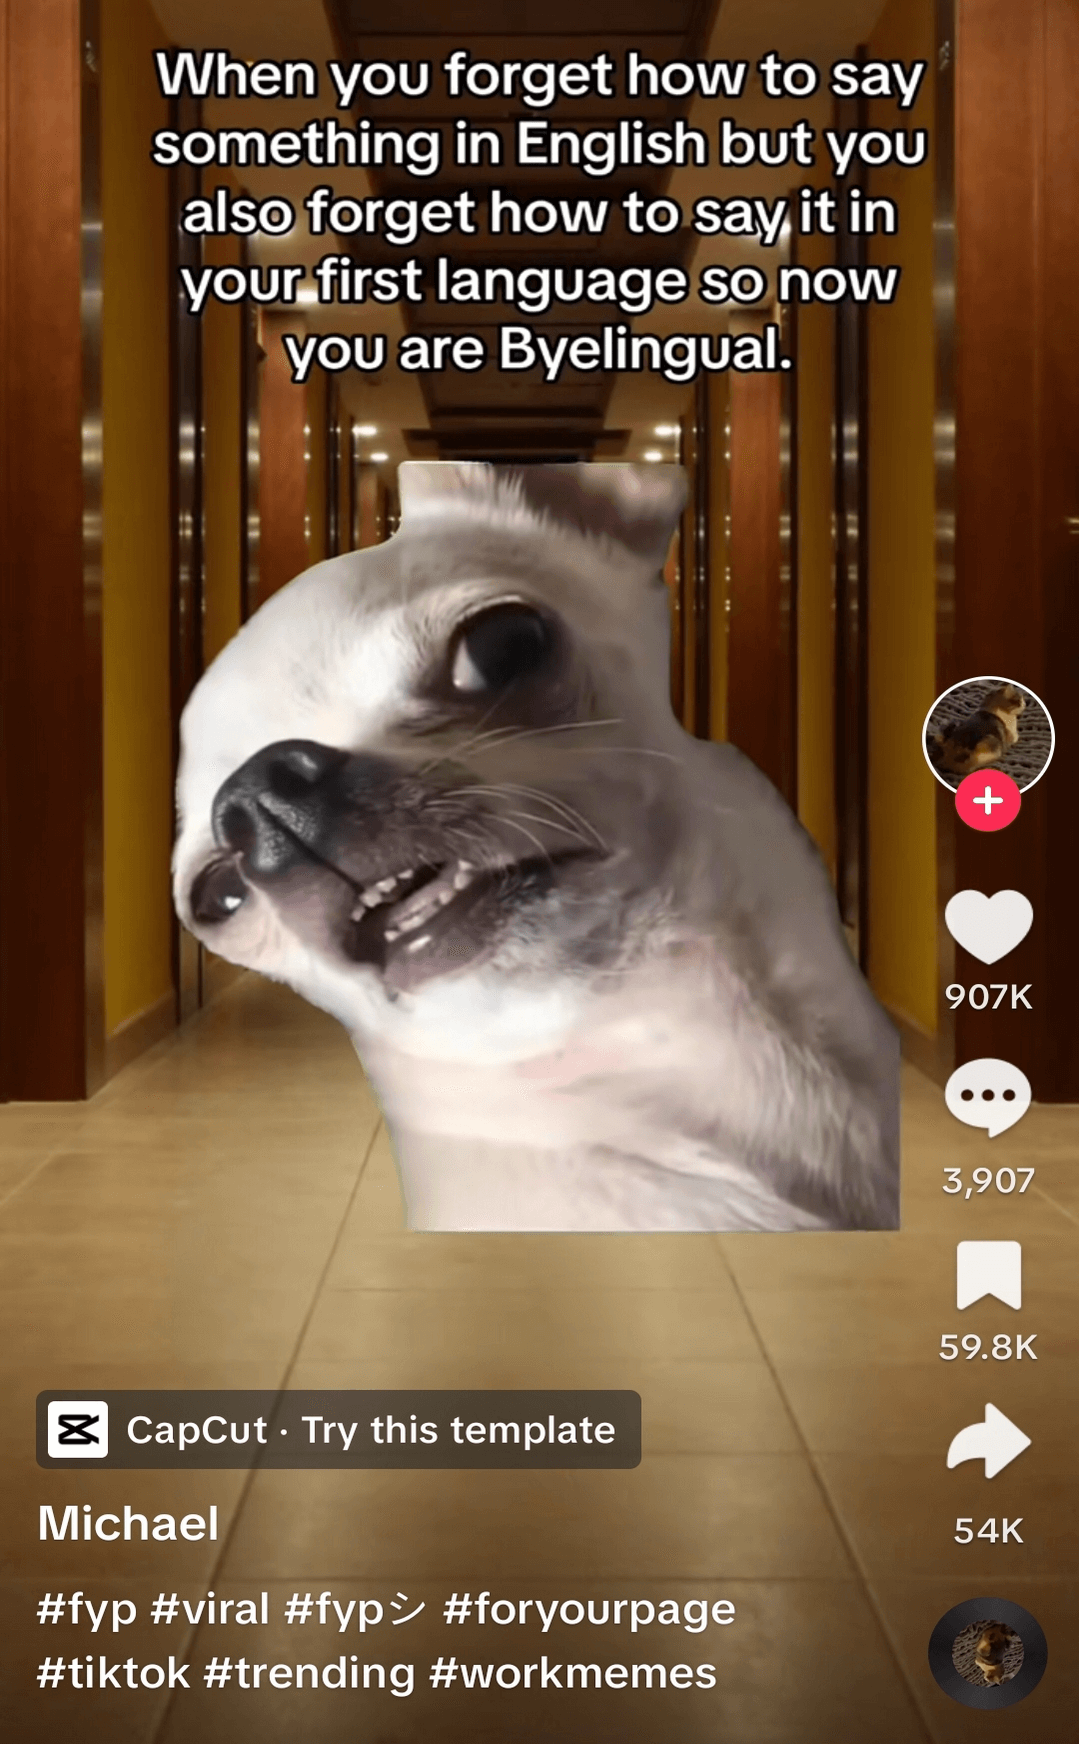 Humorous meme featuring a chihuahua with an exaggerated facial expression, representing confusion in language, on a social media platform.